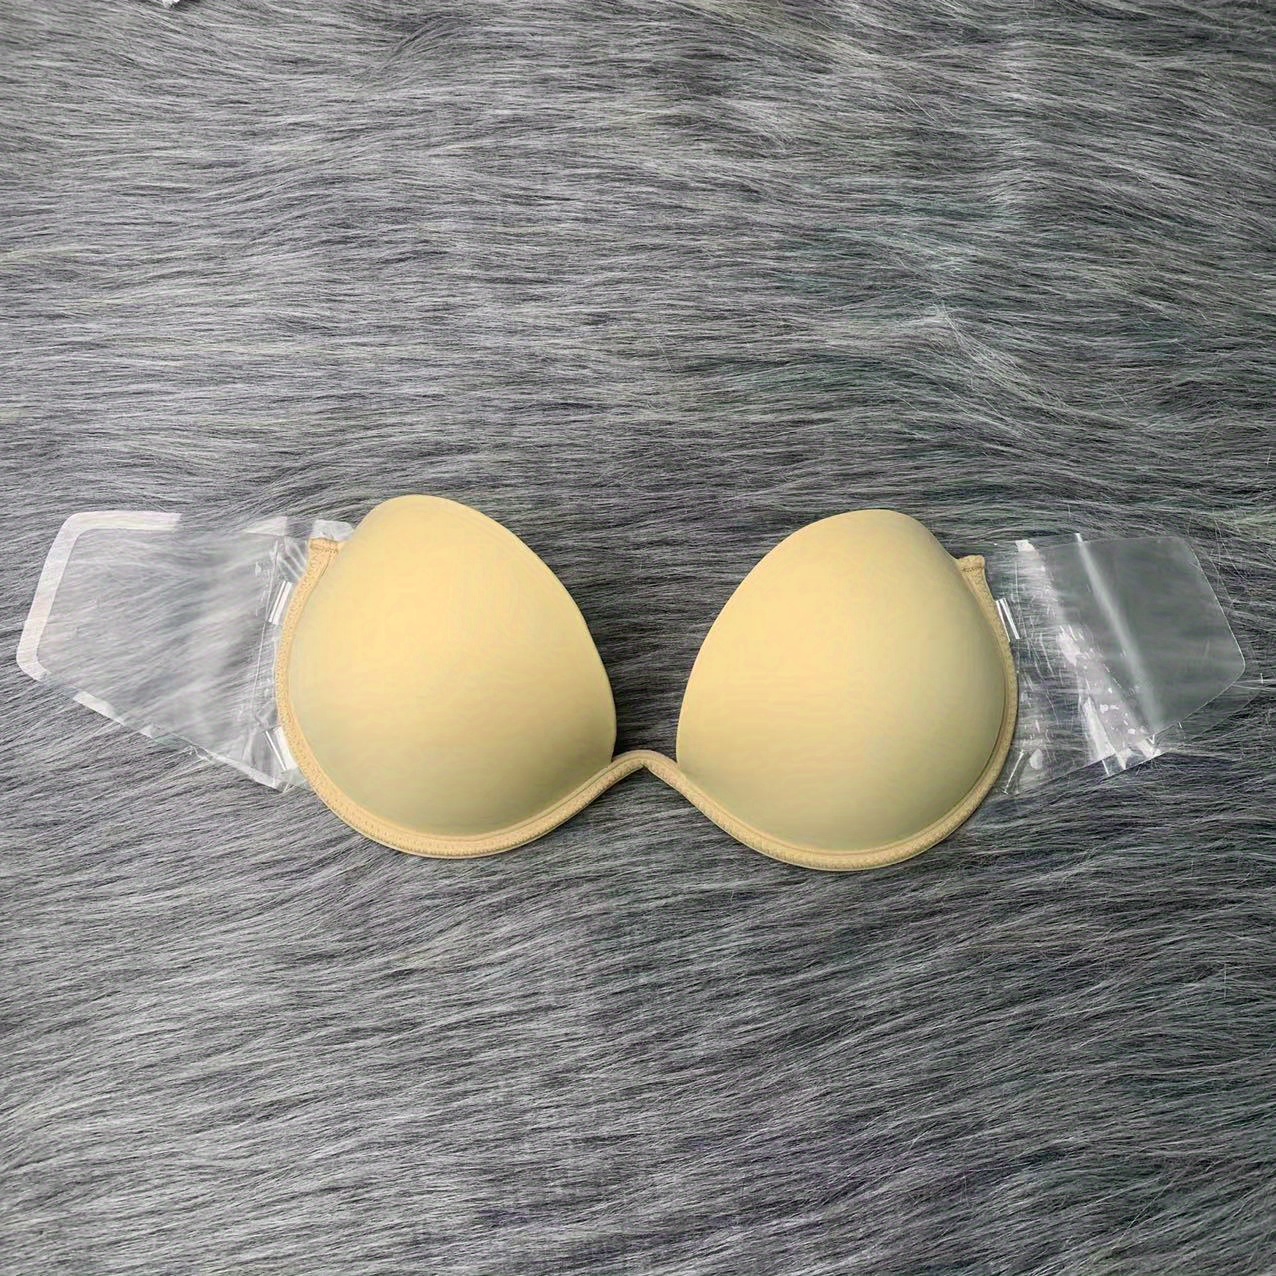 Is That The New Solid Self Adhesive Bra ??